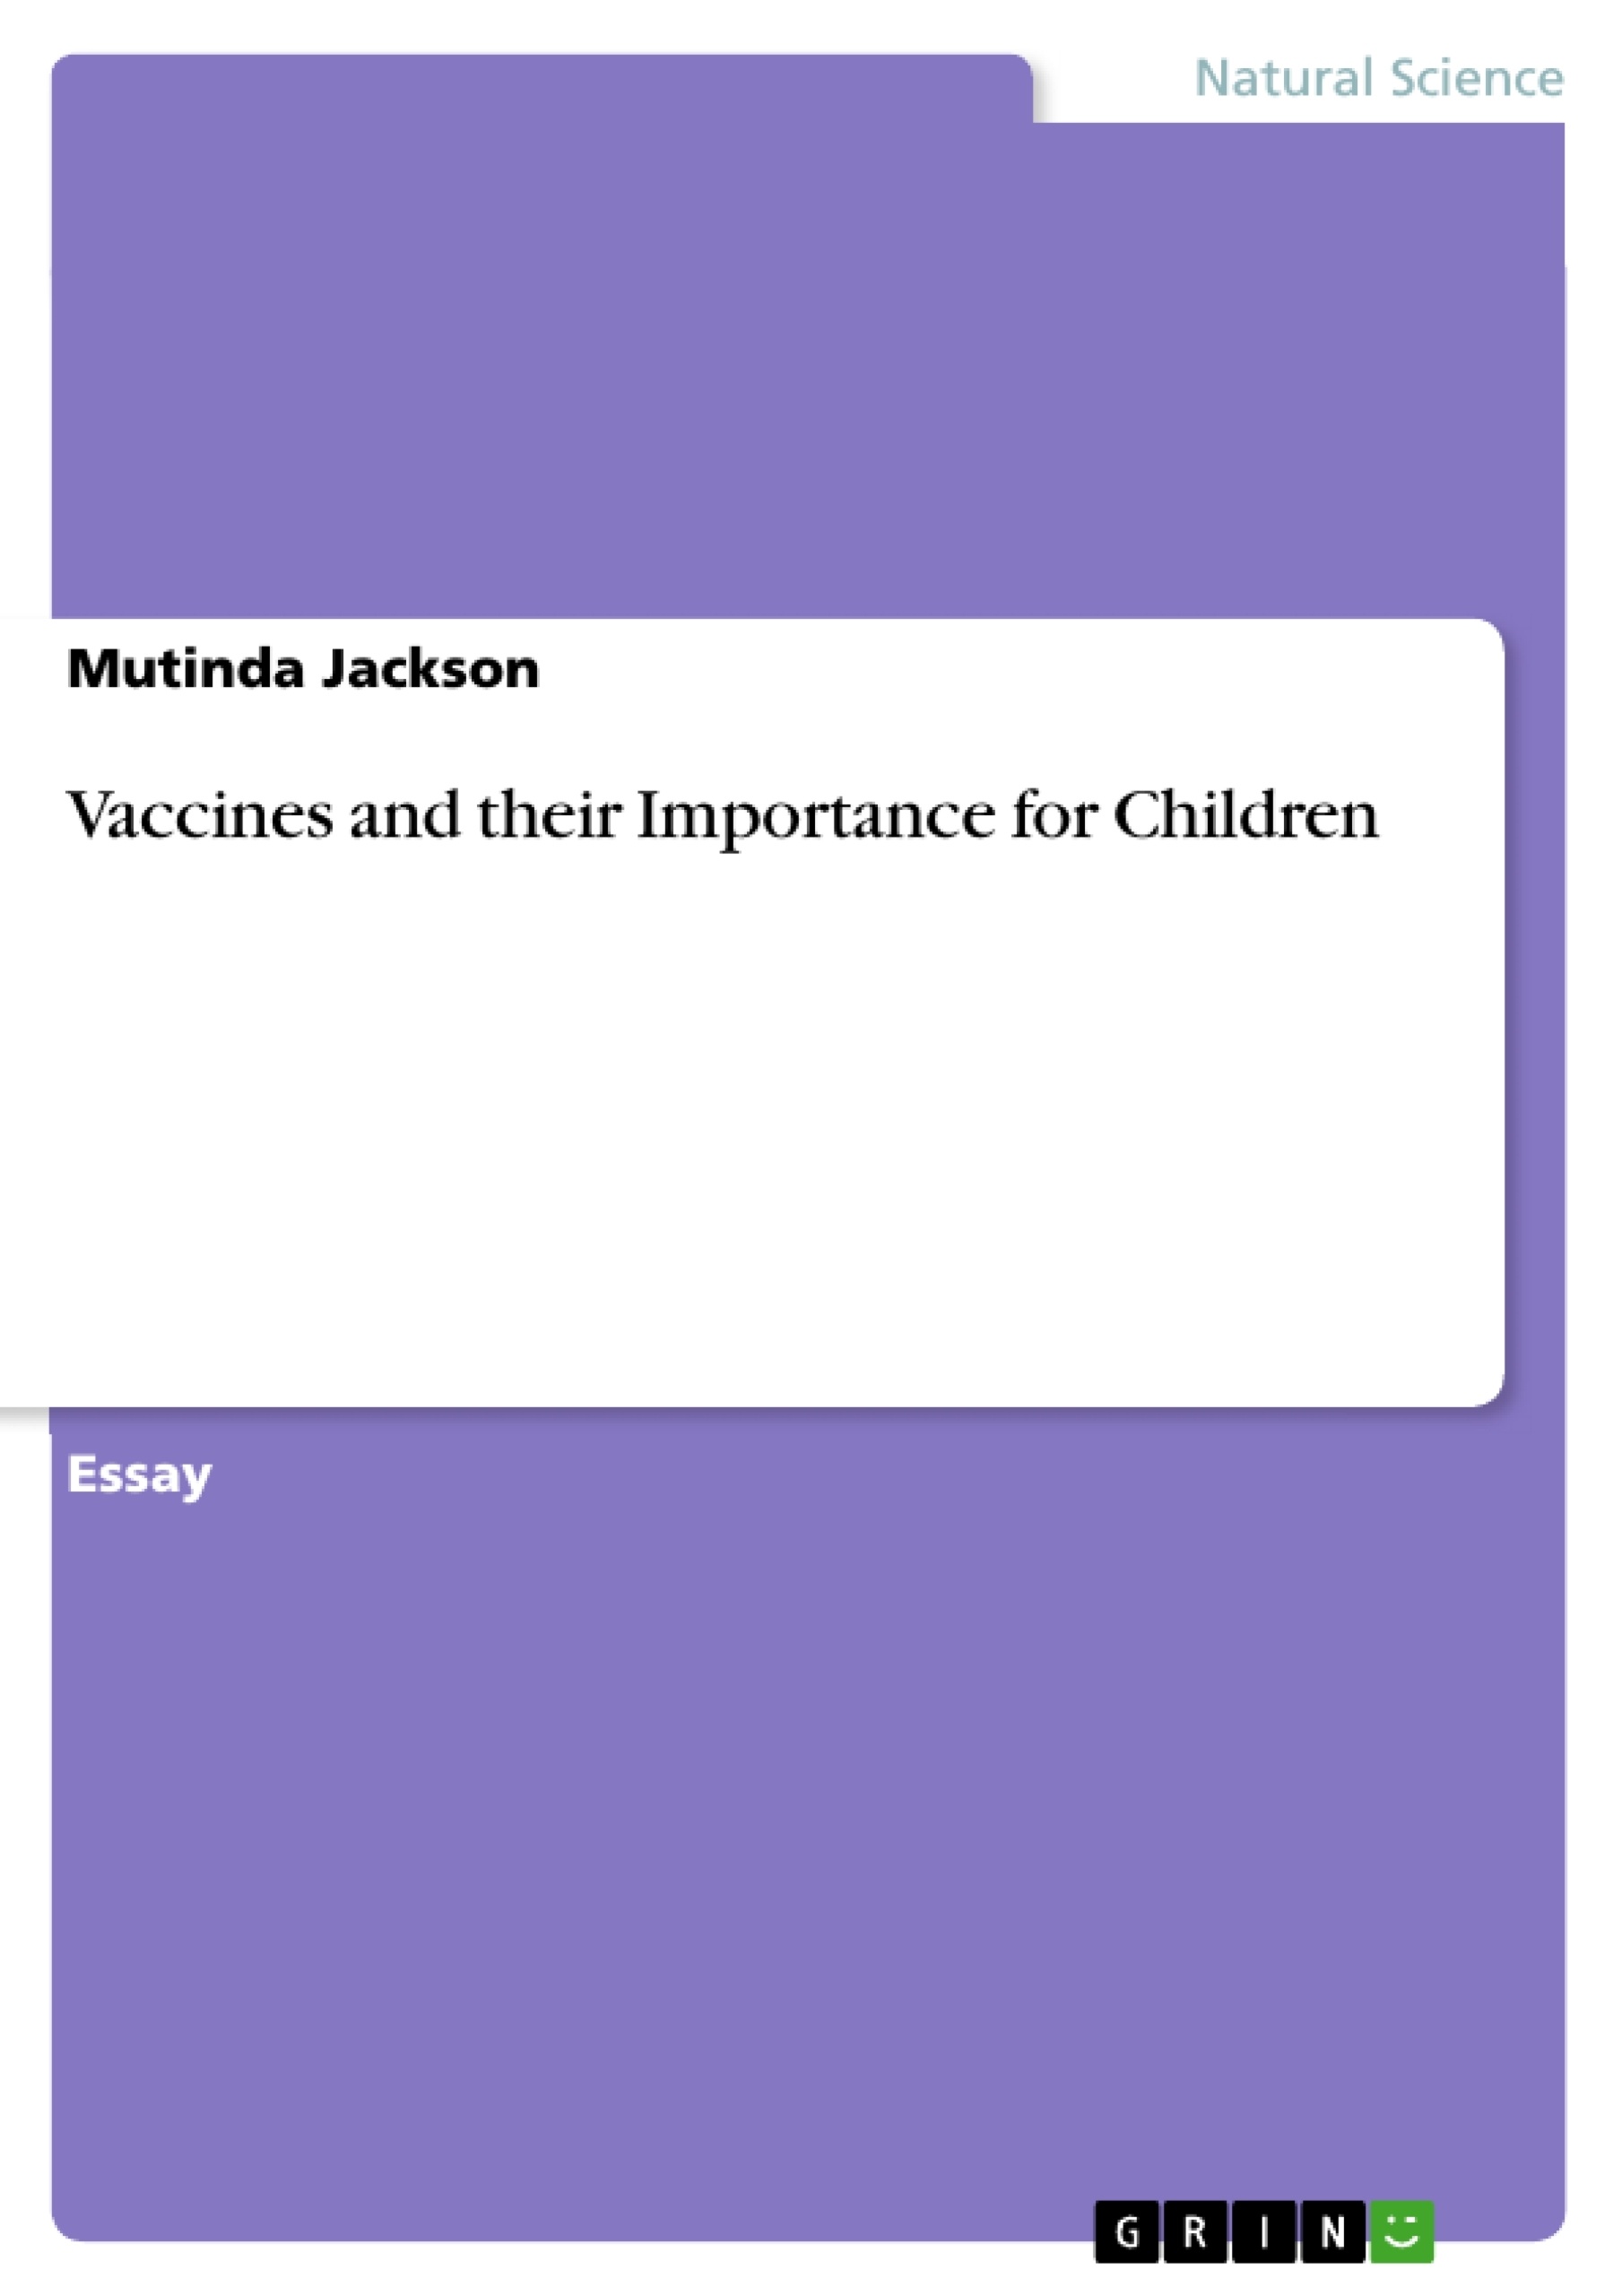 Title: Vaccines and their Importance for Children